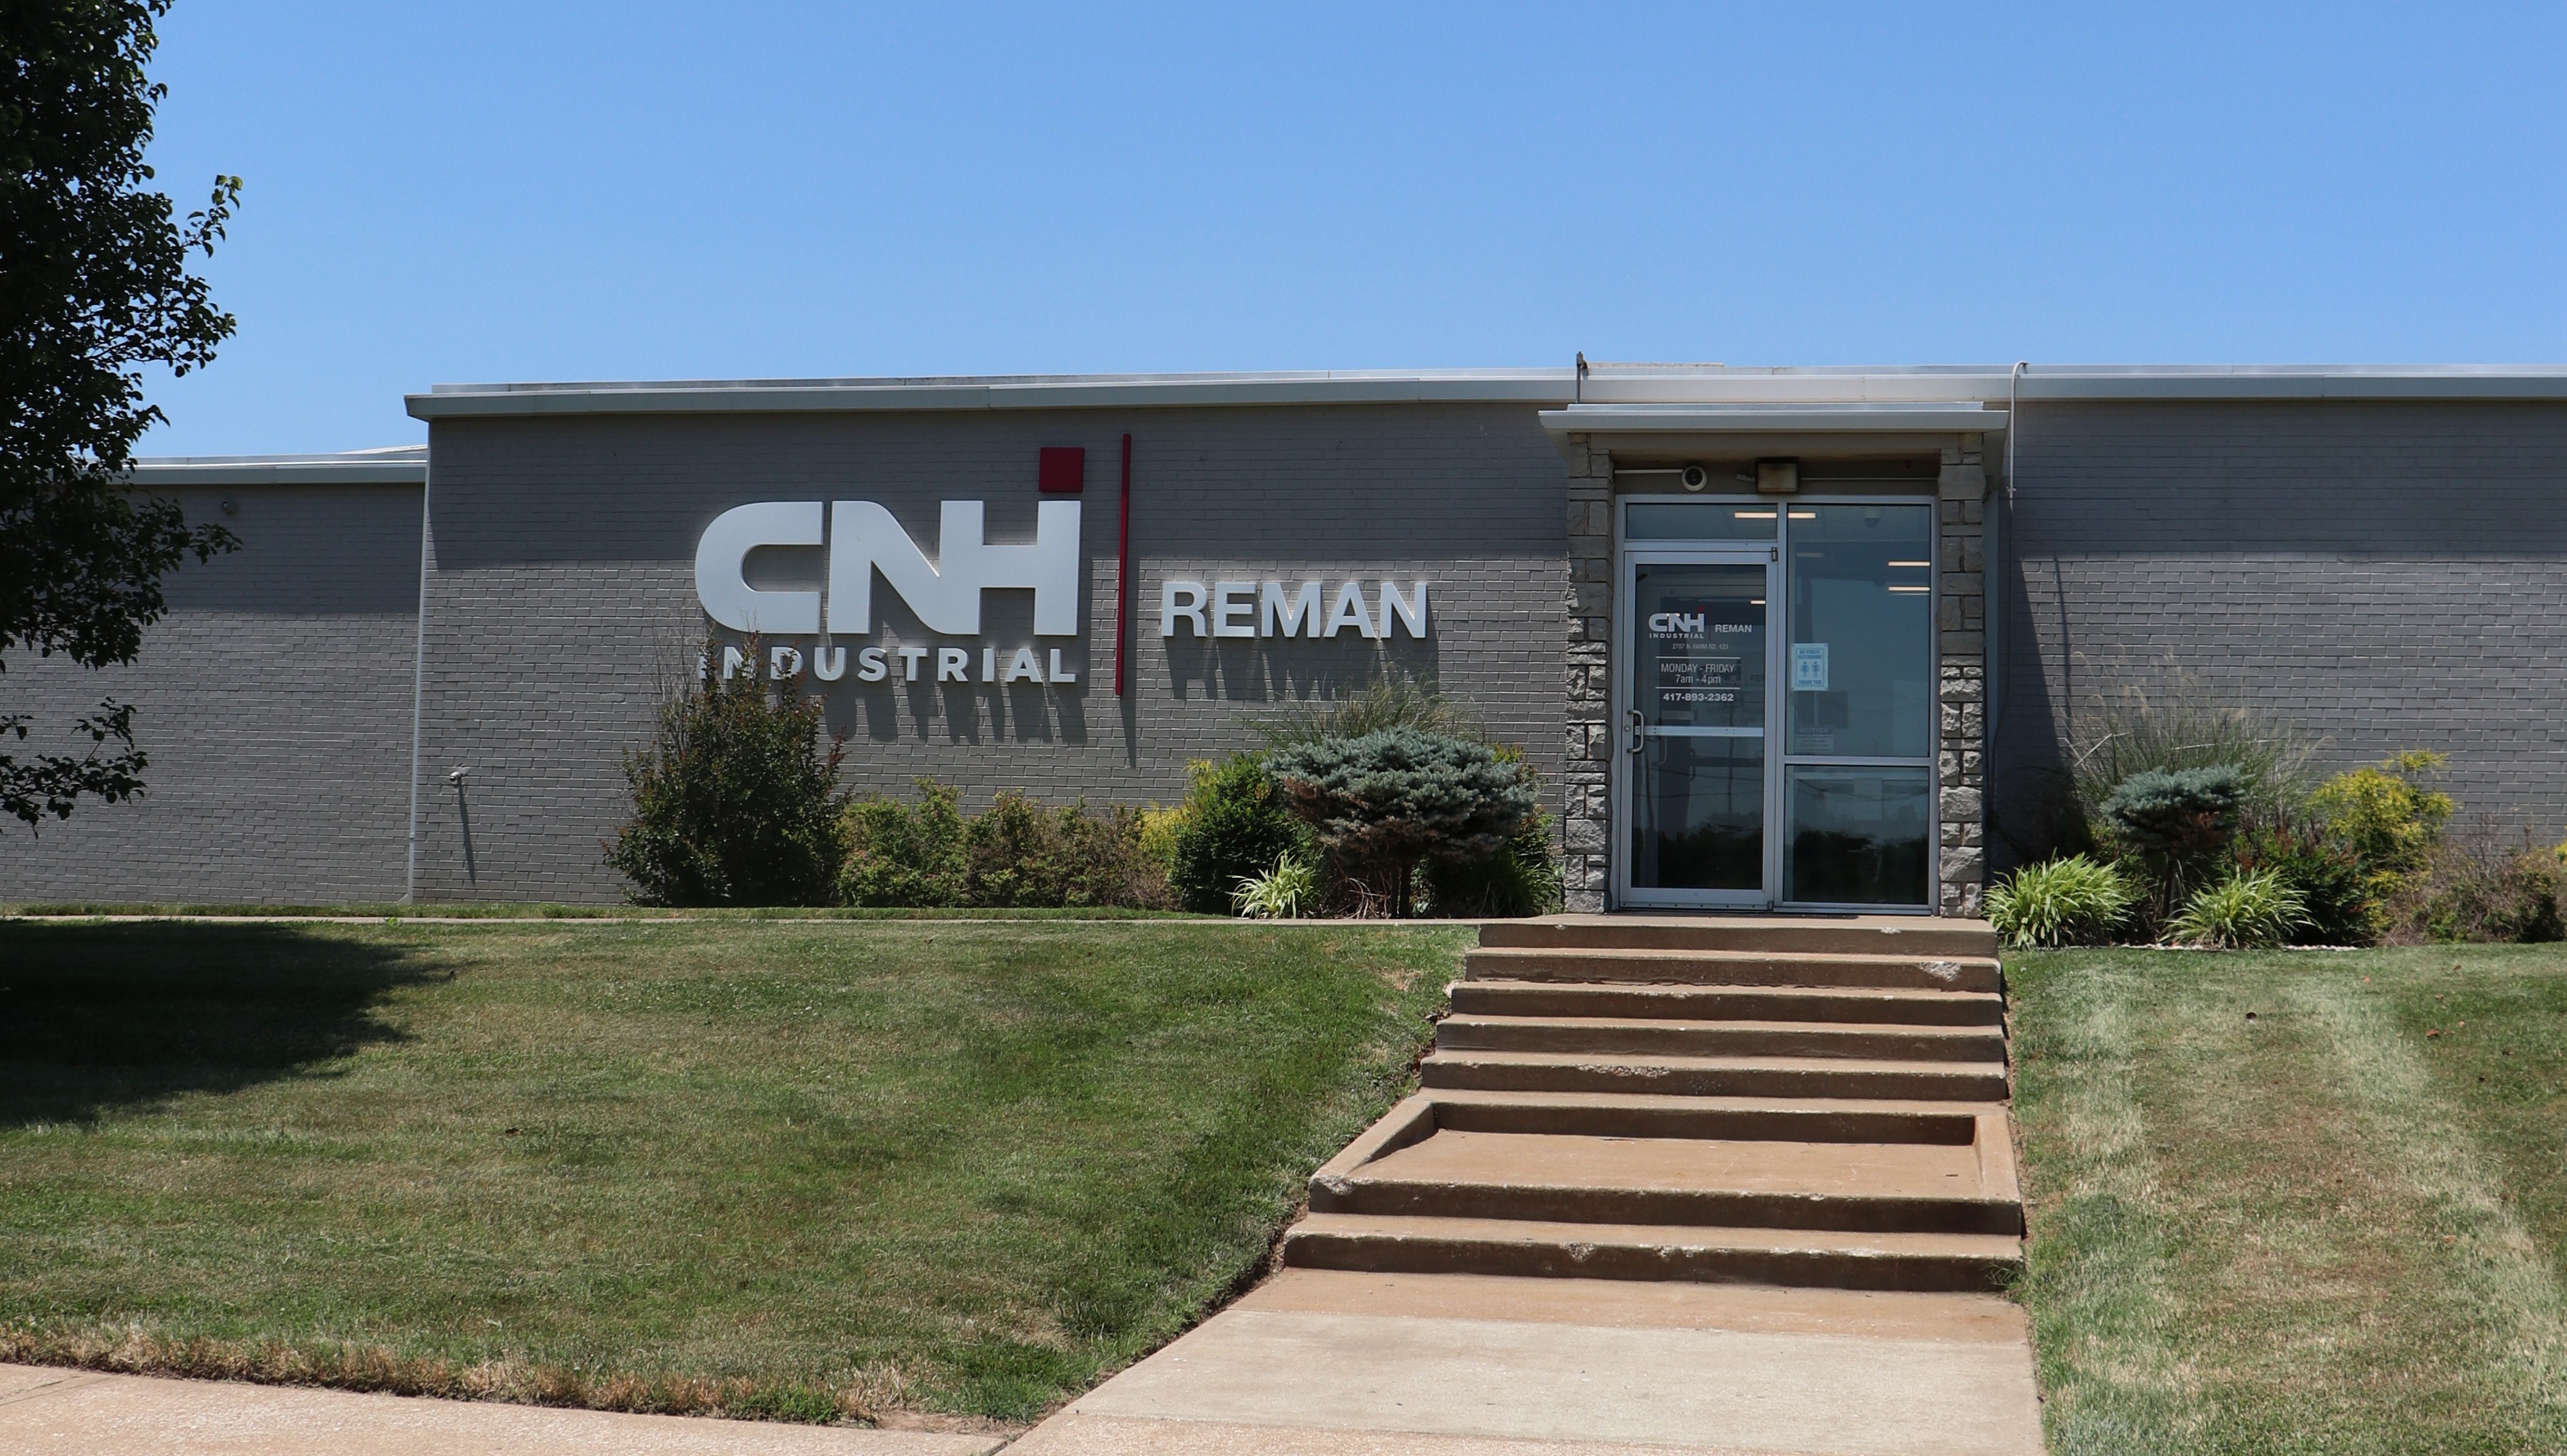 The CNH Industrial Reman facility in Springfield, Missouri, USA